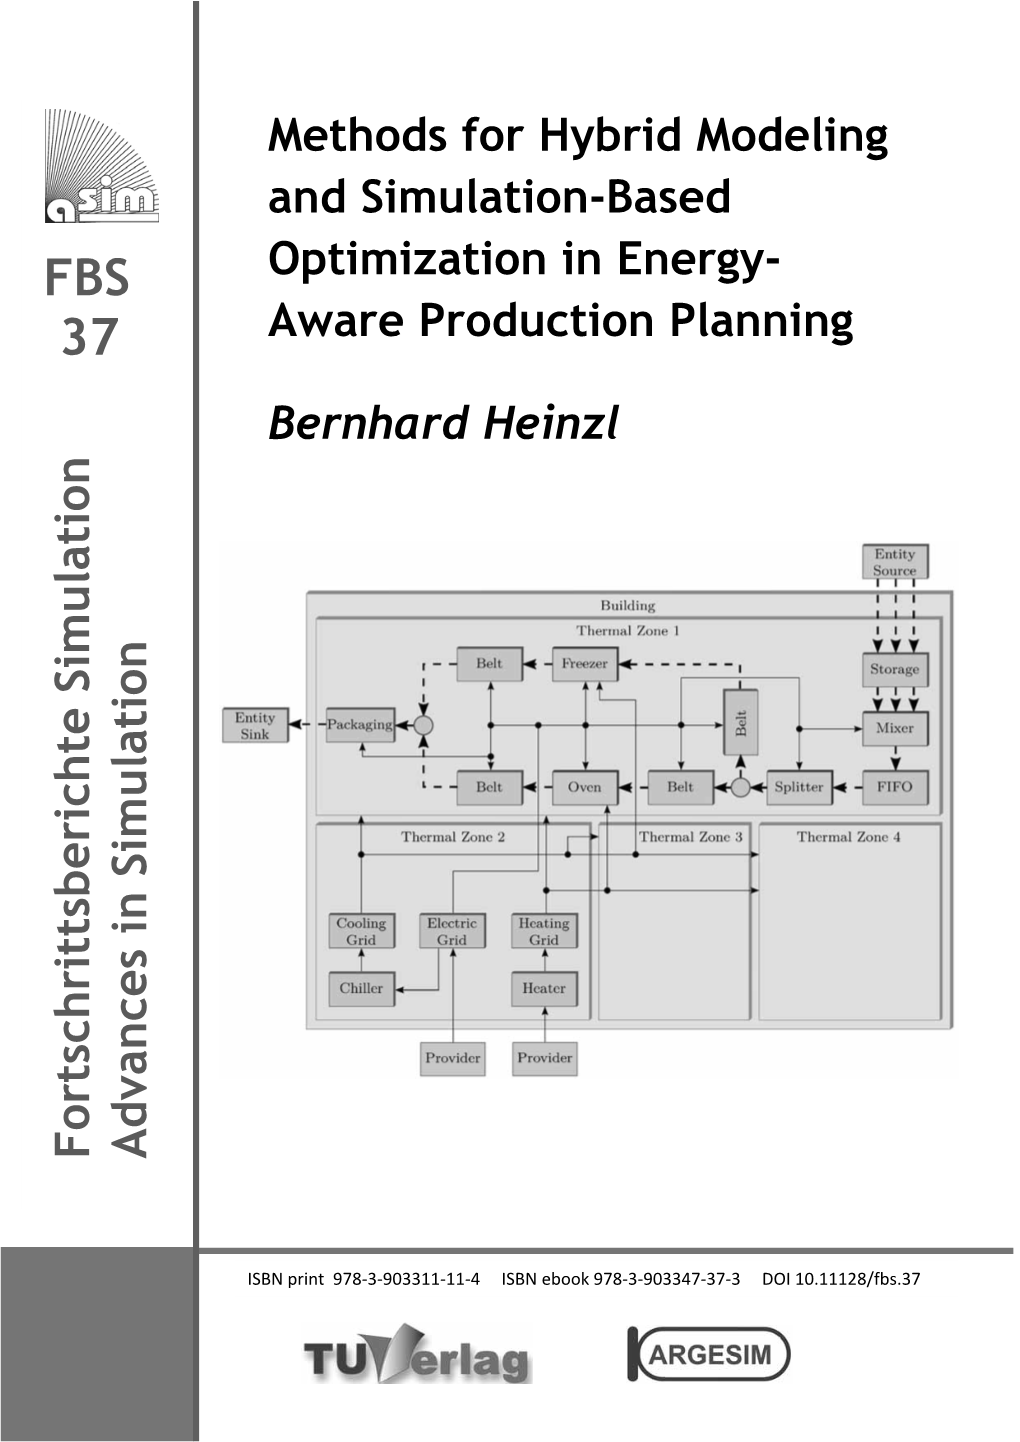 Methods for Hybrid Modeling and Simulation-Based Optimization in Energy-Aware Production Planning